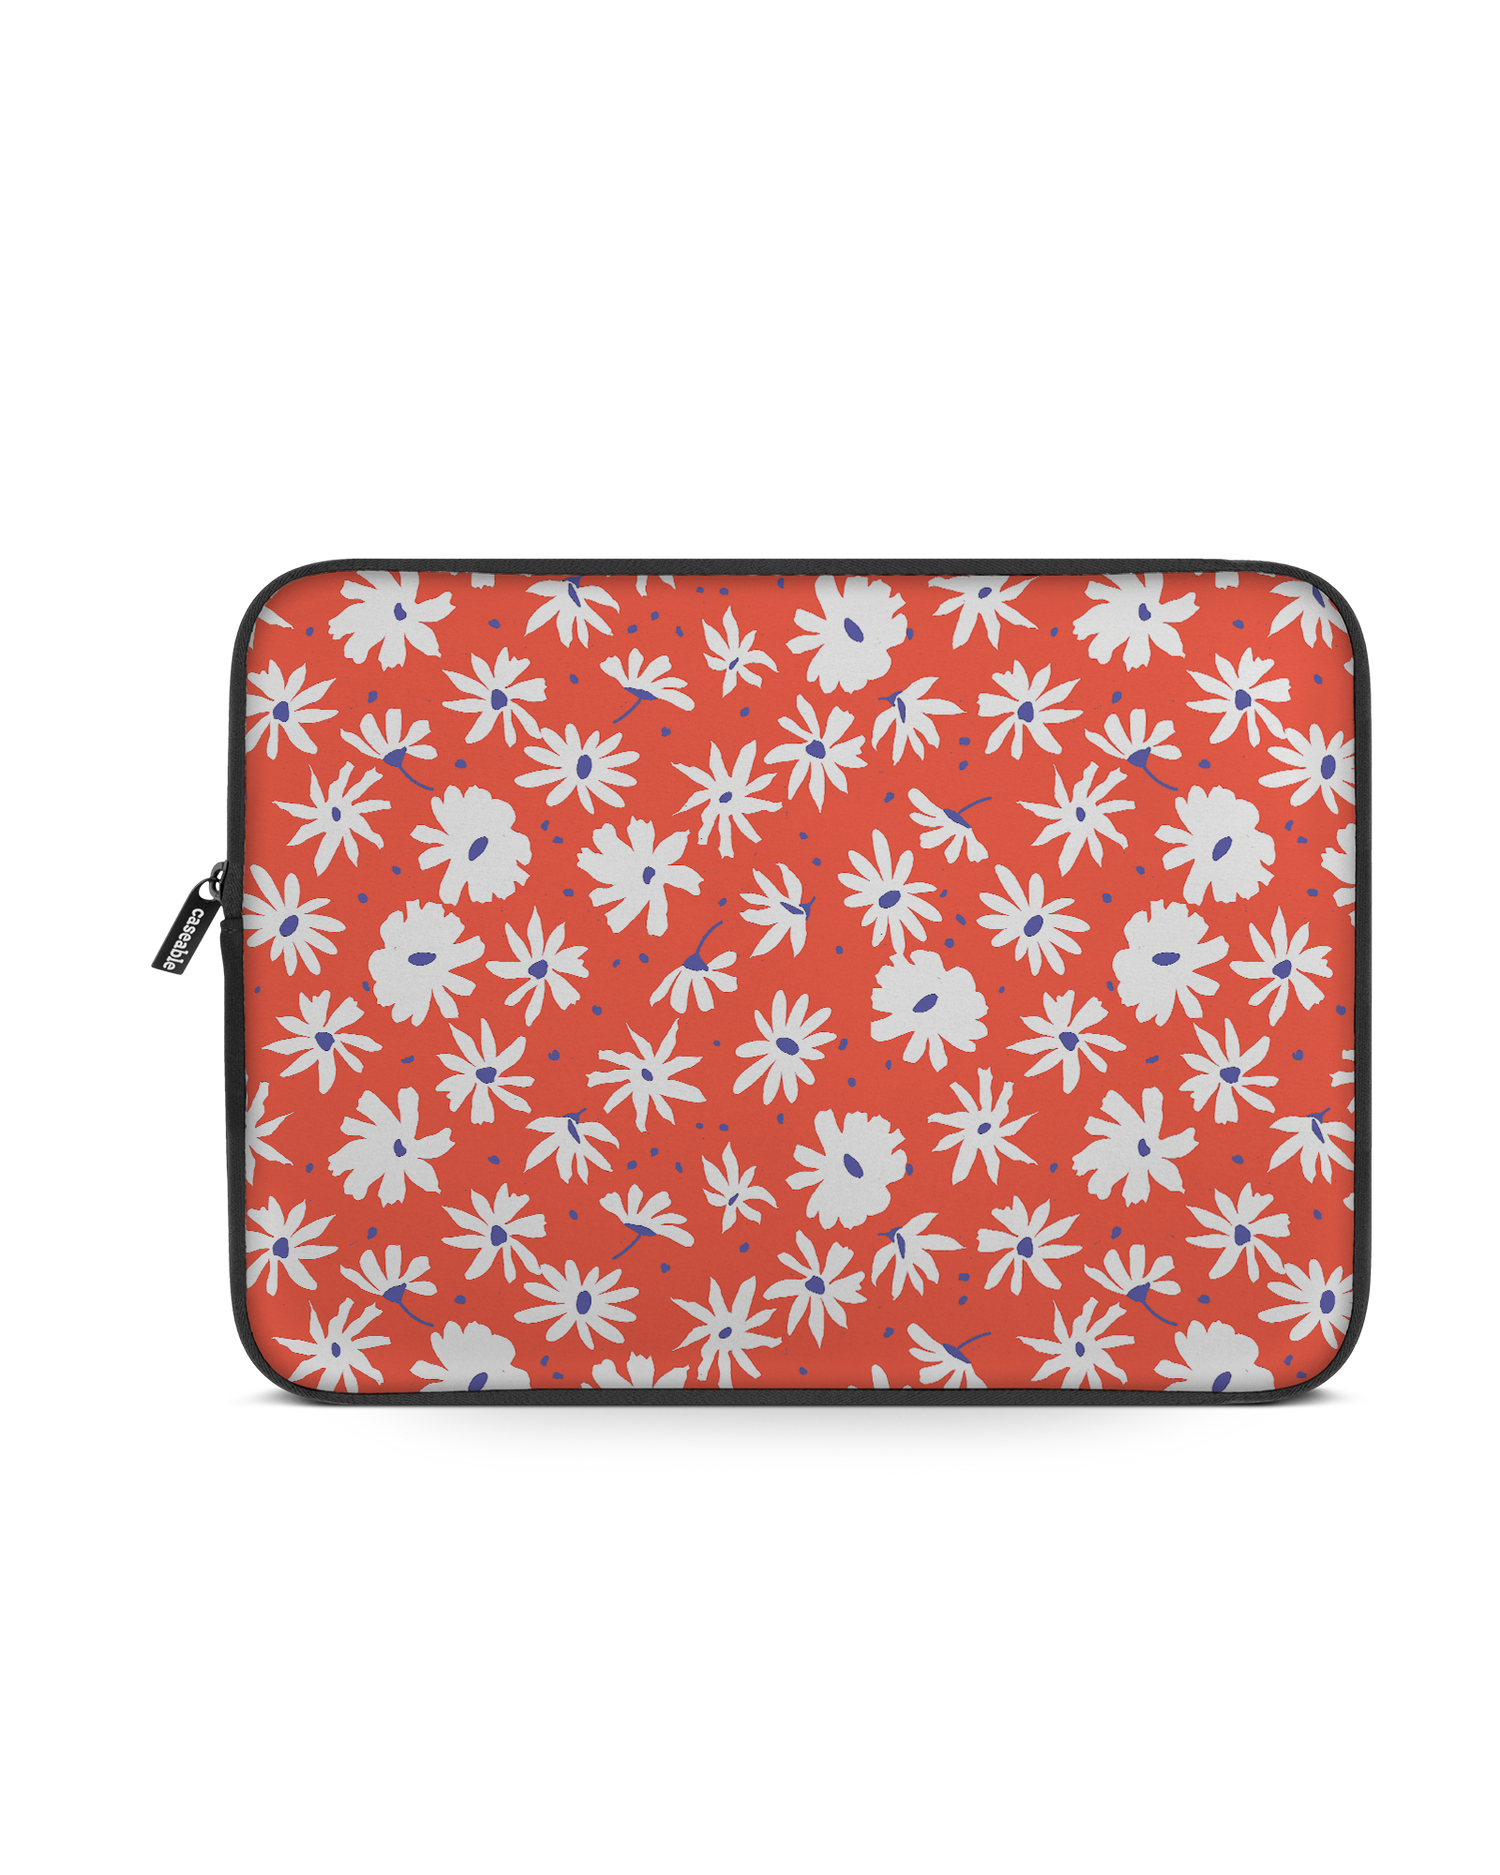 Retro Daisy Laptop Case 13 inch: Front View